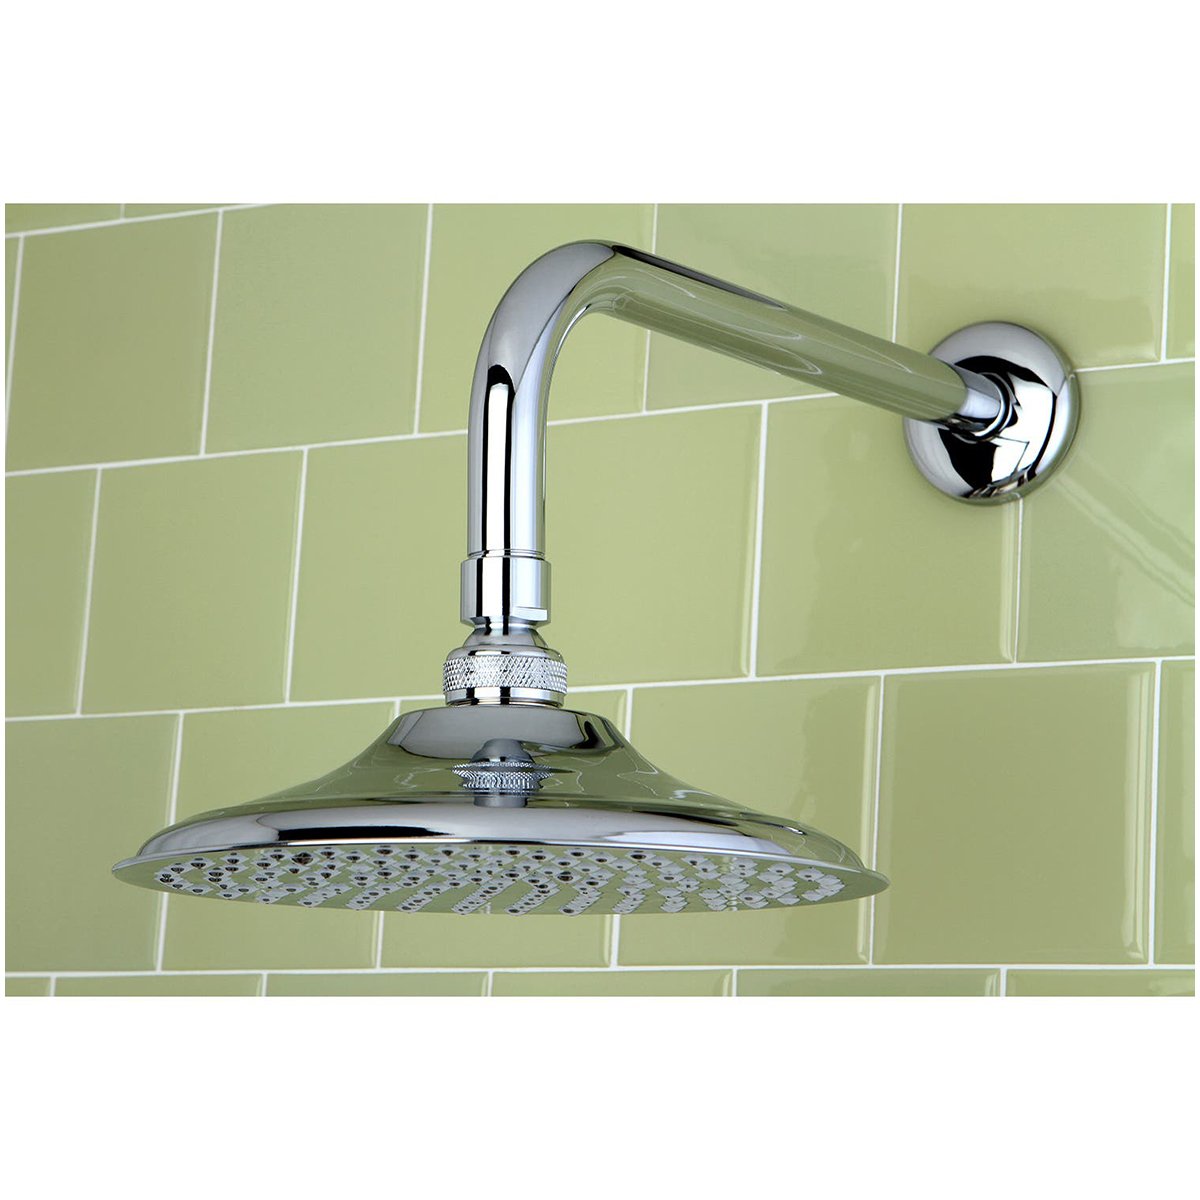 Kingston Brass Victorian 5-1/4" Shower Head with Shower Arm in Polished Chrome